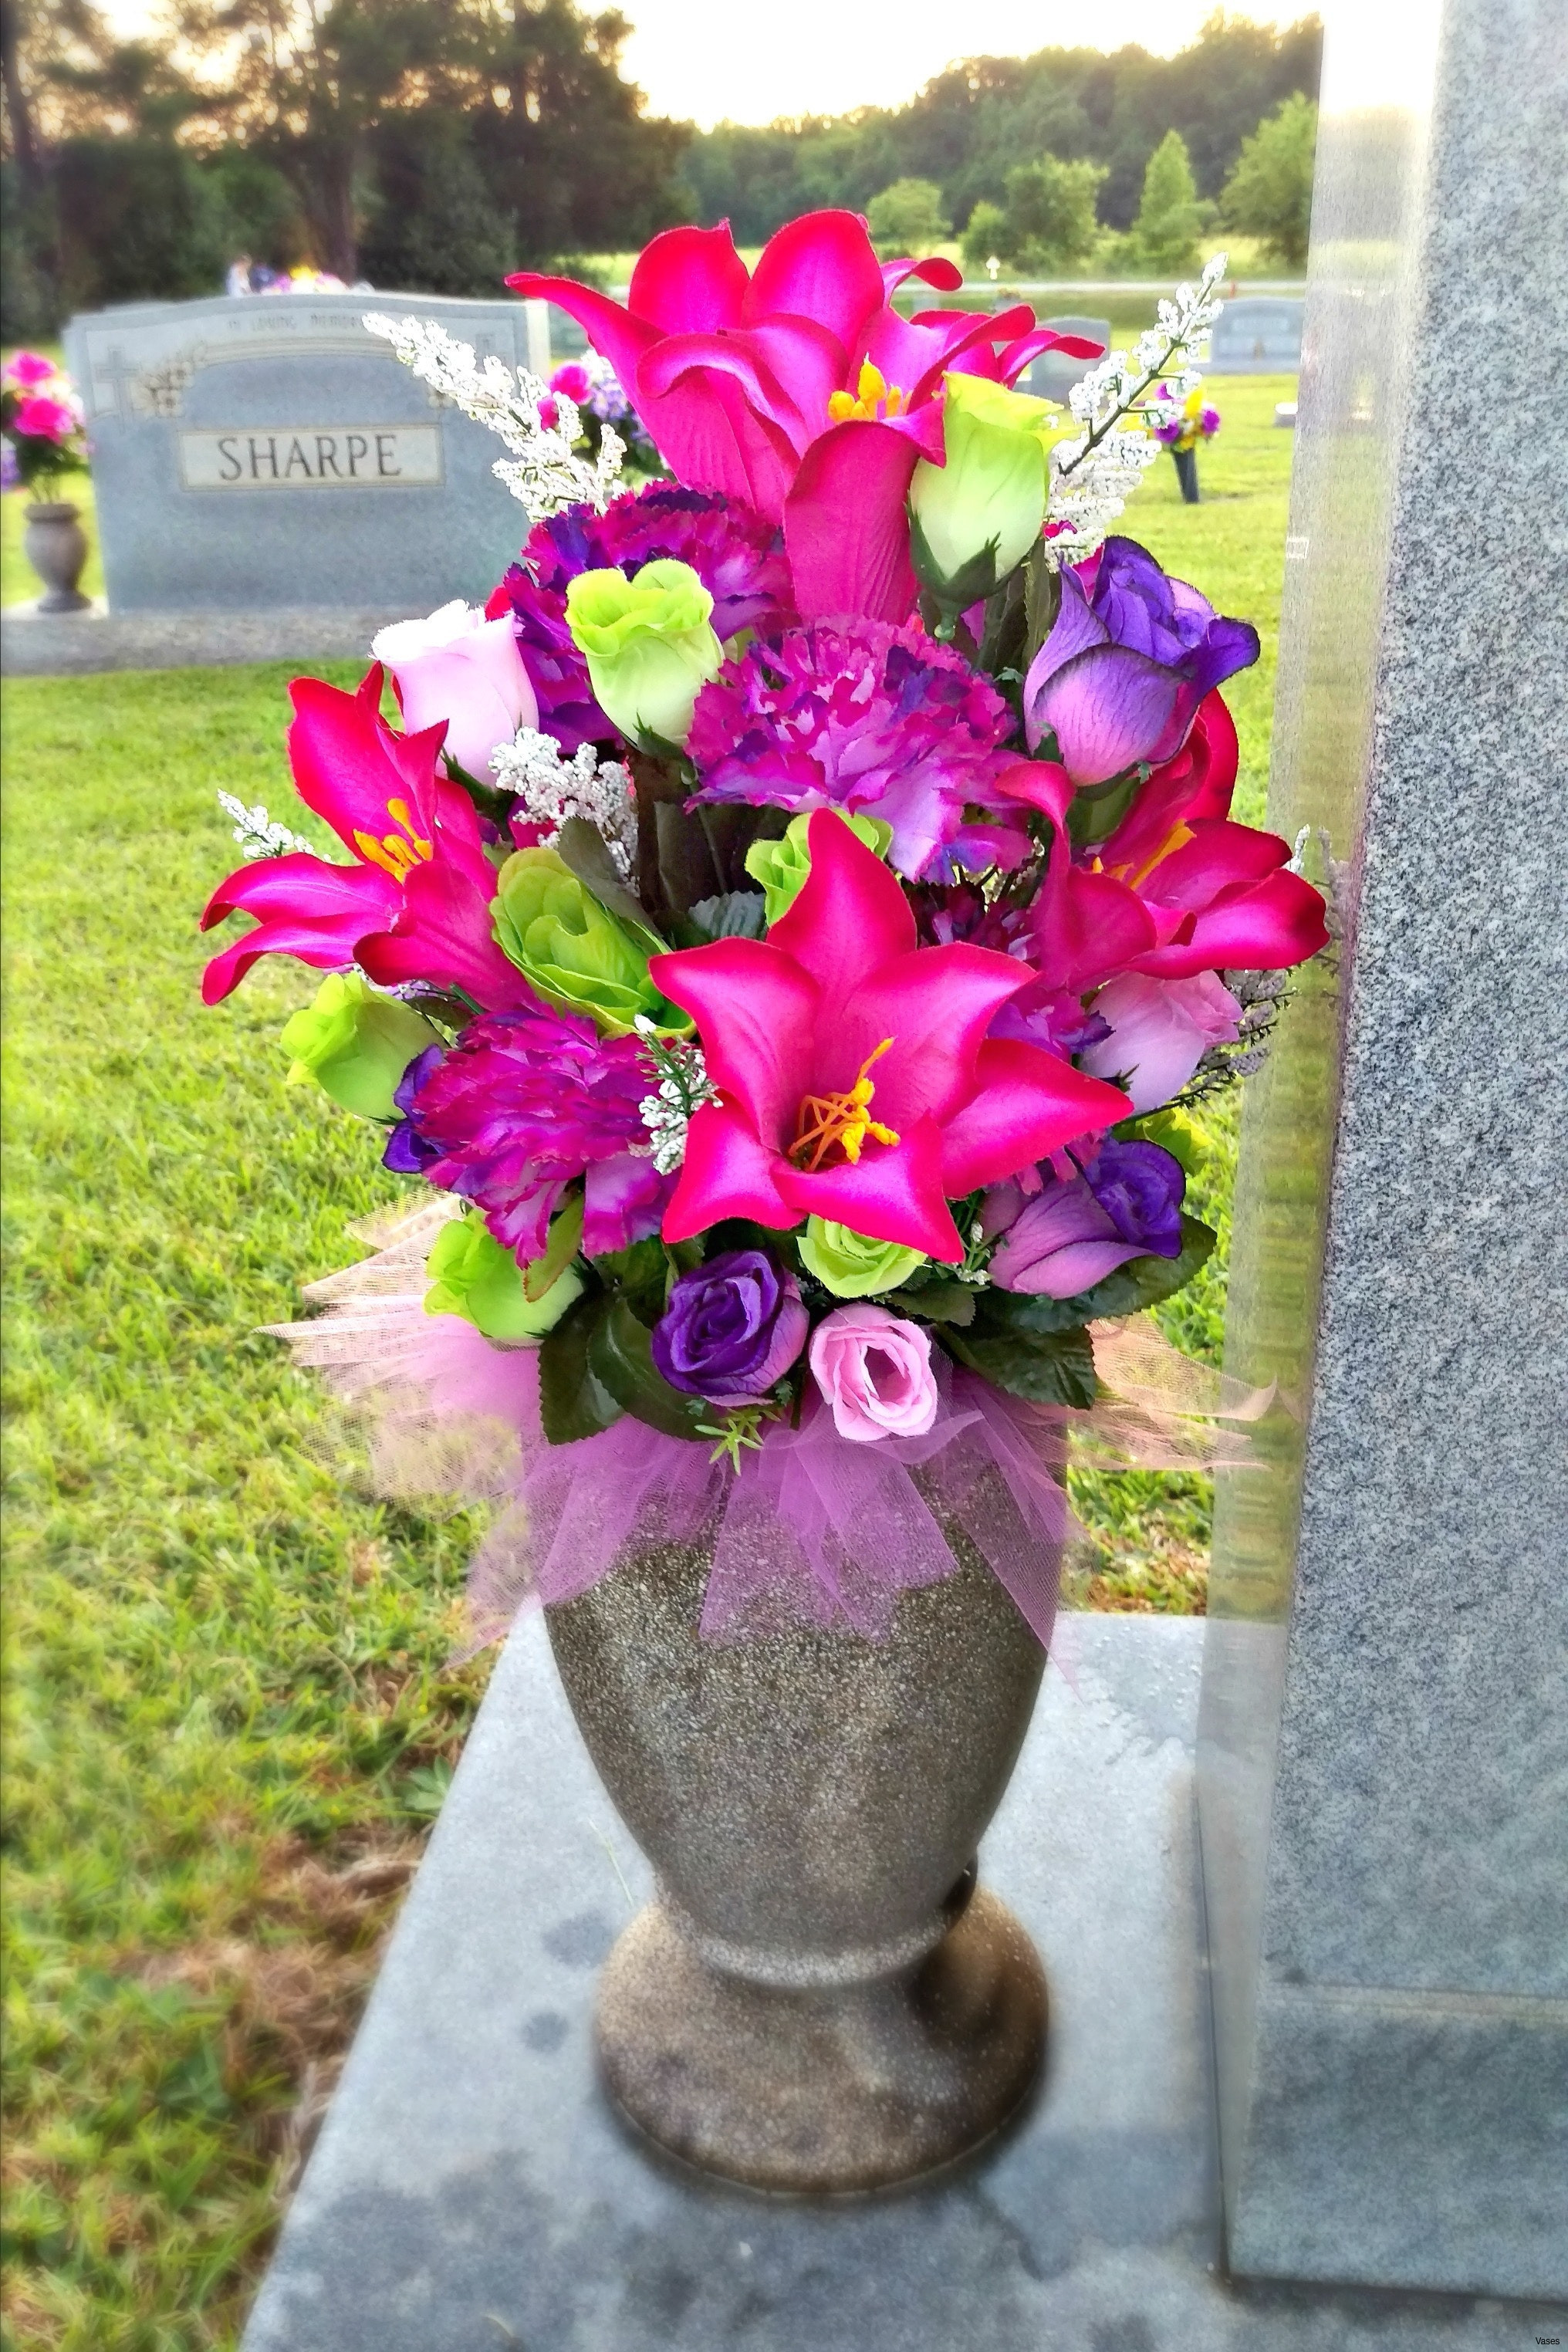 30 attractive wholesale Flowers and Vases 2024 free download wholesale flowers and vases of cemetery vases wholesale gallery 32 inspirational decorative flower regarding cemetery vases wholesale gallery 32 inspirational decorative flower vase of cemet